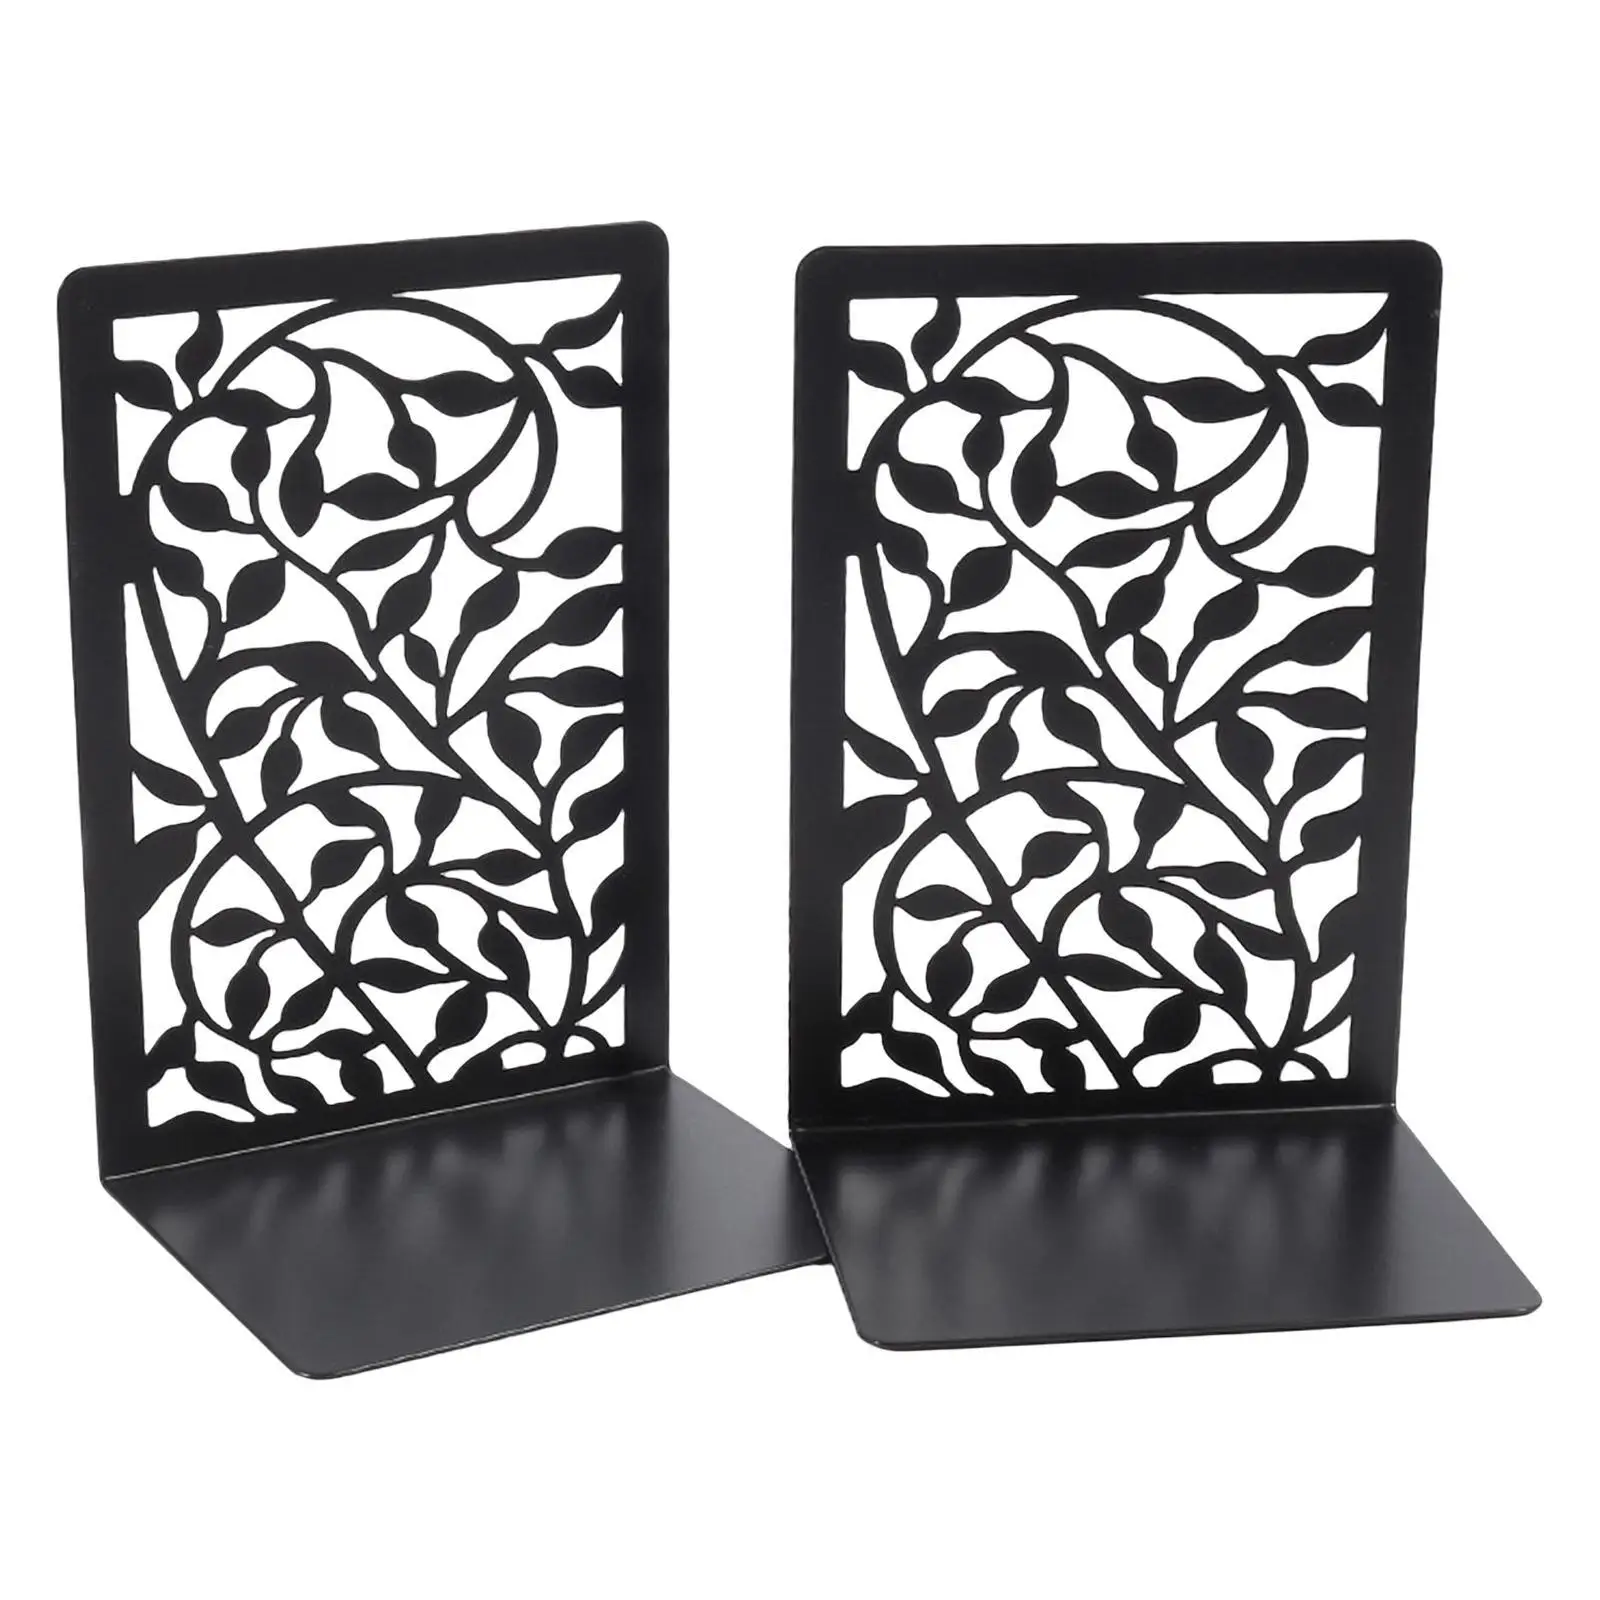 

1 Pair Book Ends Book Shelf Holder Metal Bookends for Shelves Home Desk Style A